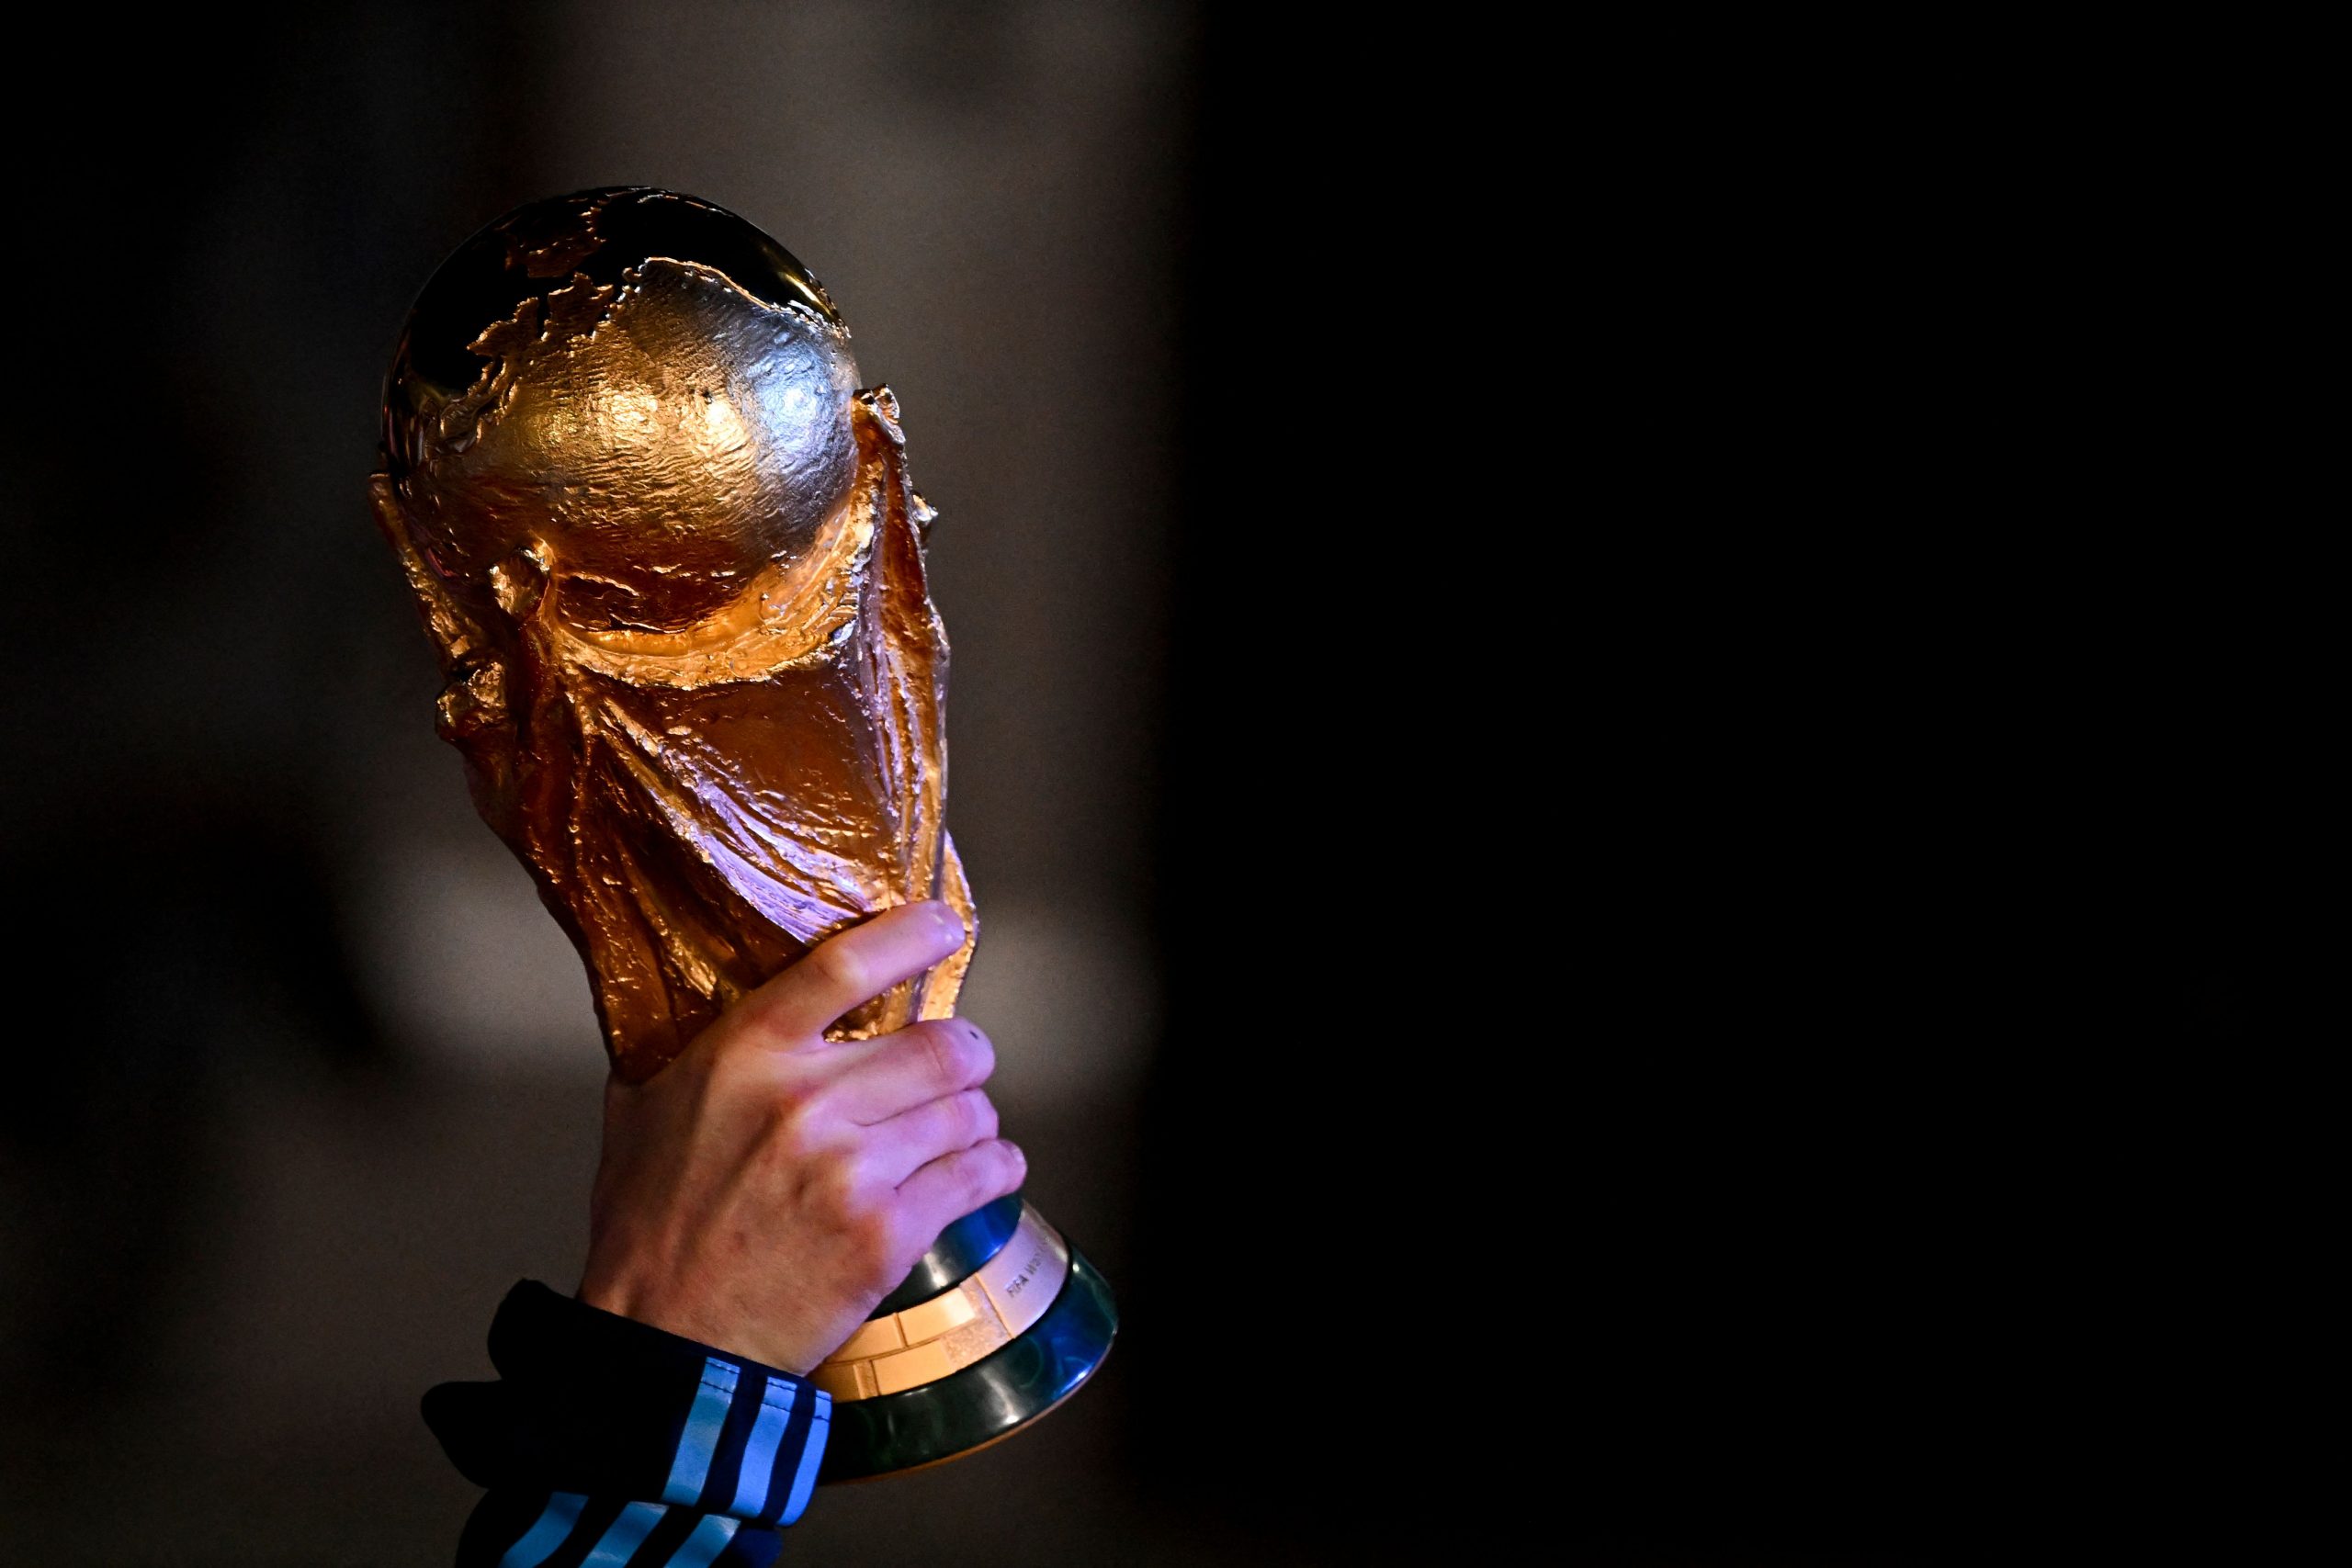 The World Cup trophy. (Photo by LUIS ROBAYO/AFP via Getty Images)